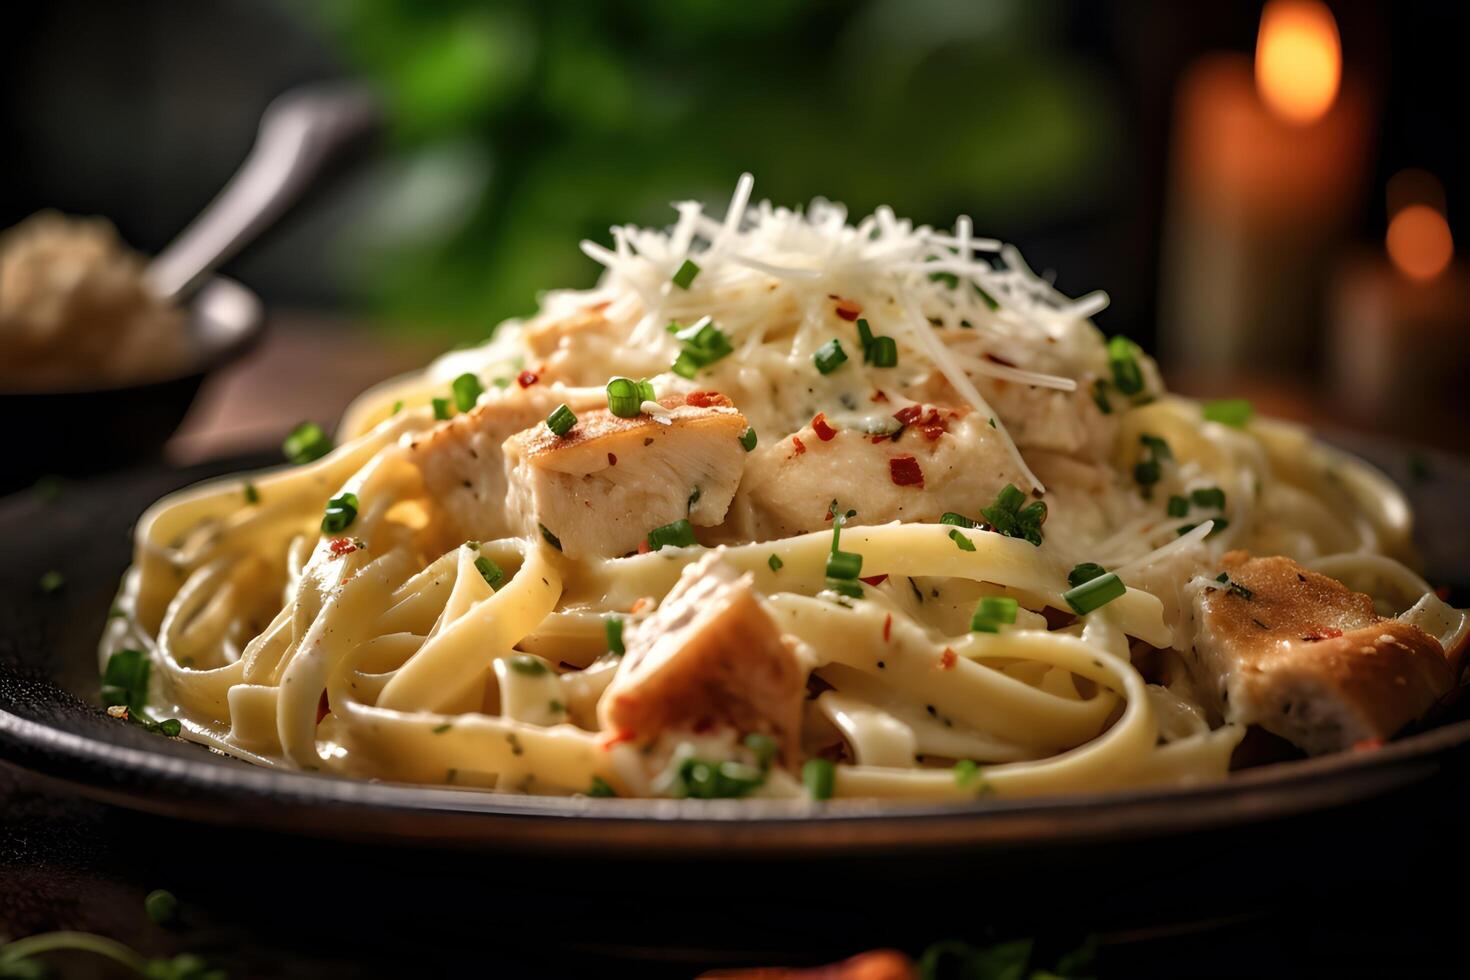 chicken alfredo with fettuccine, Parmesan cheese, porcelain plate background, Italian style, photo